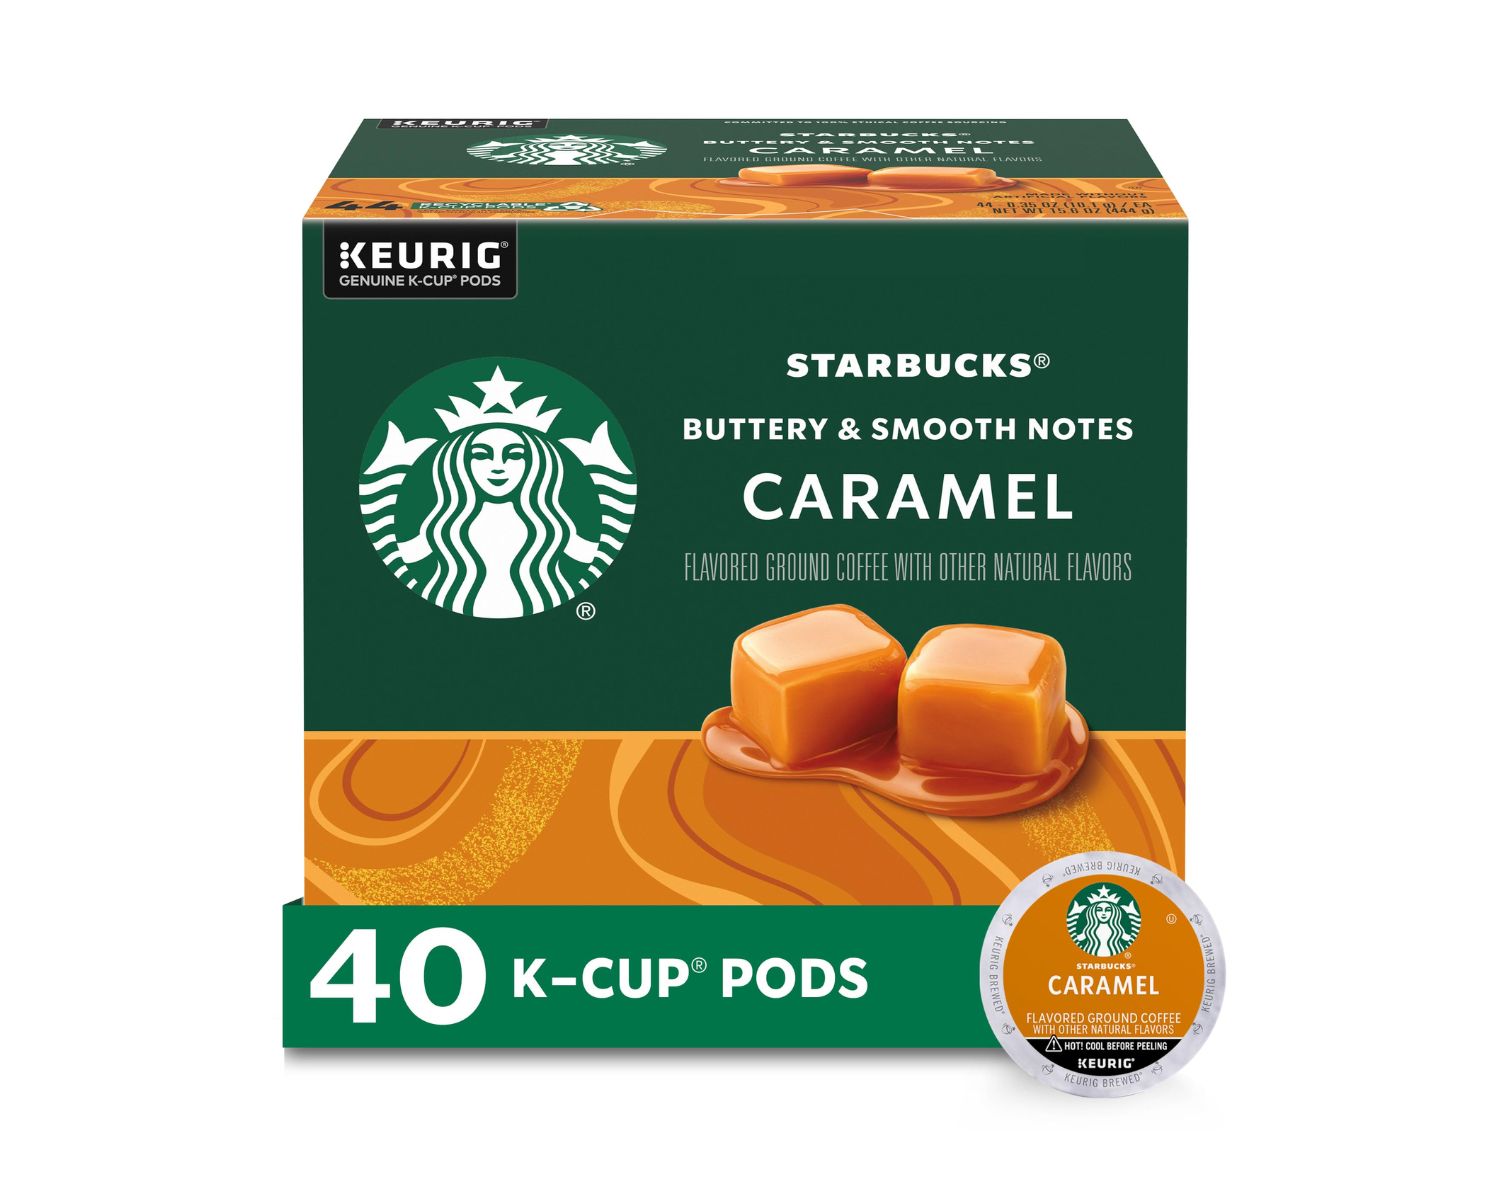 10-starbucks-caramel-coffee-pods-nutrition-facts